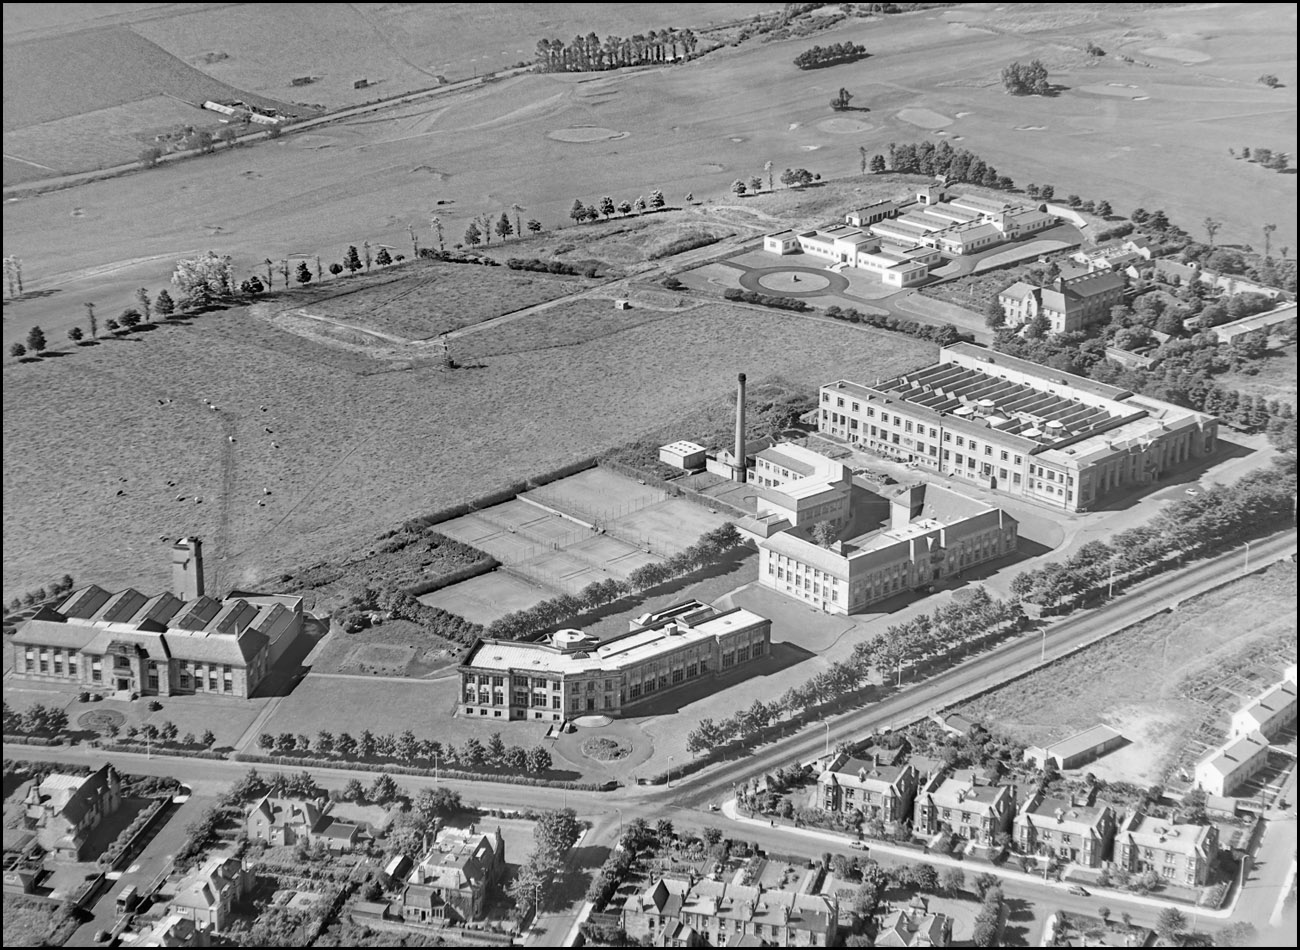 An aerial photograph of The King's Buildings campus in 1954